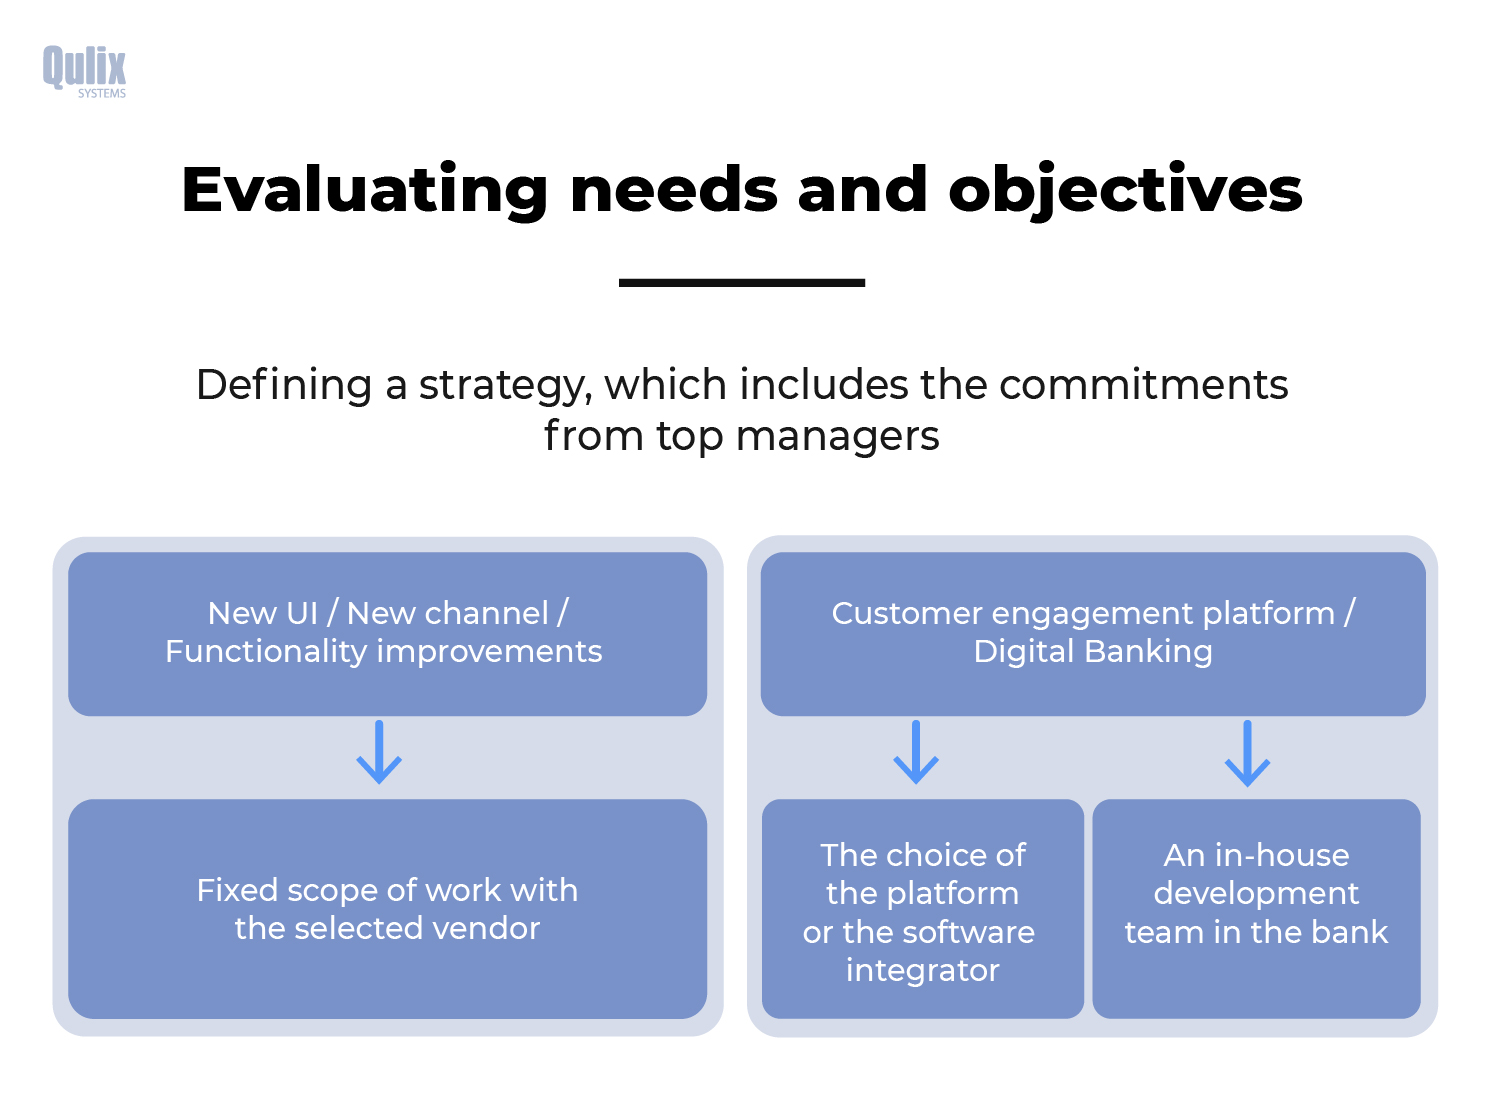 needs and objectives in digital banking